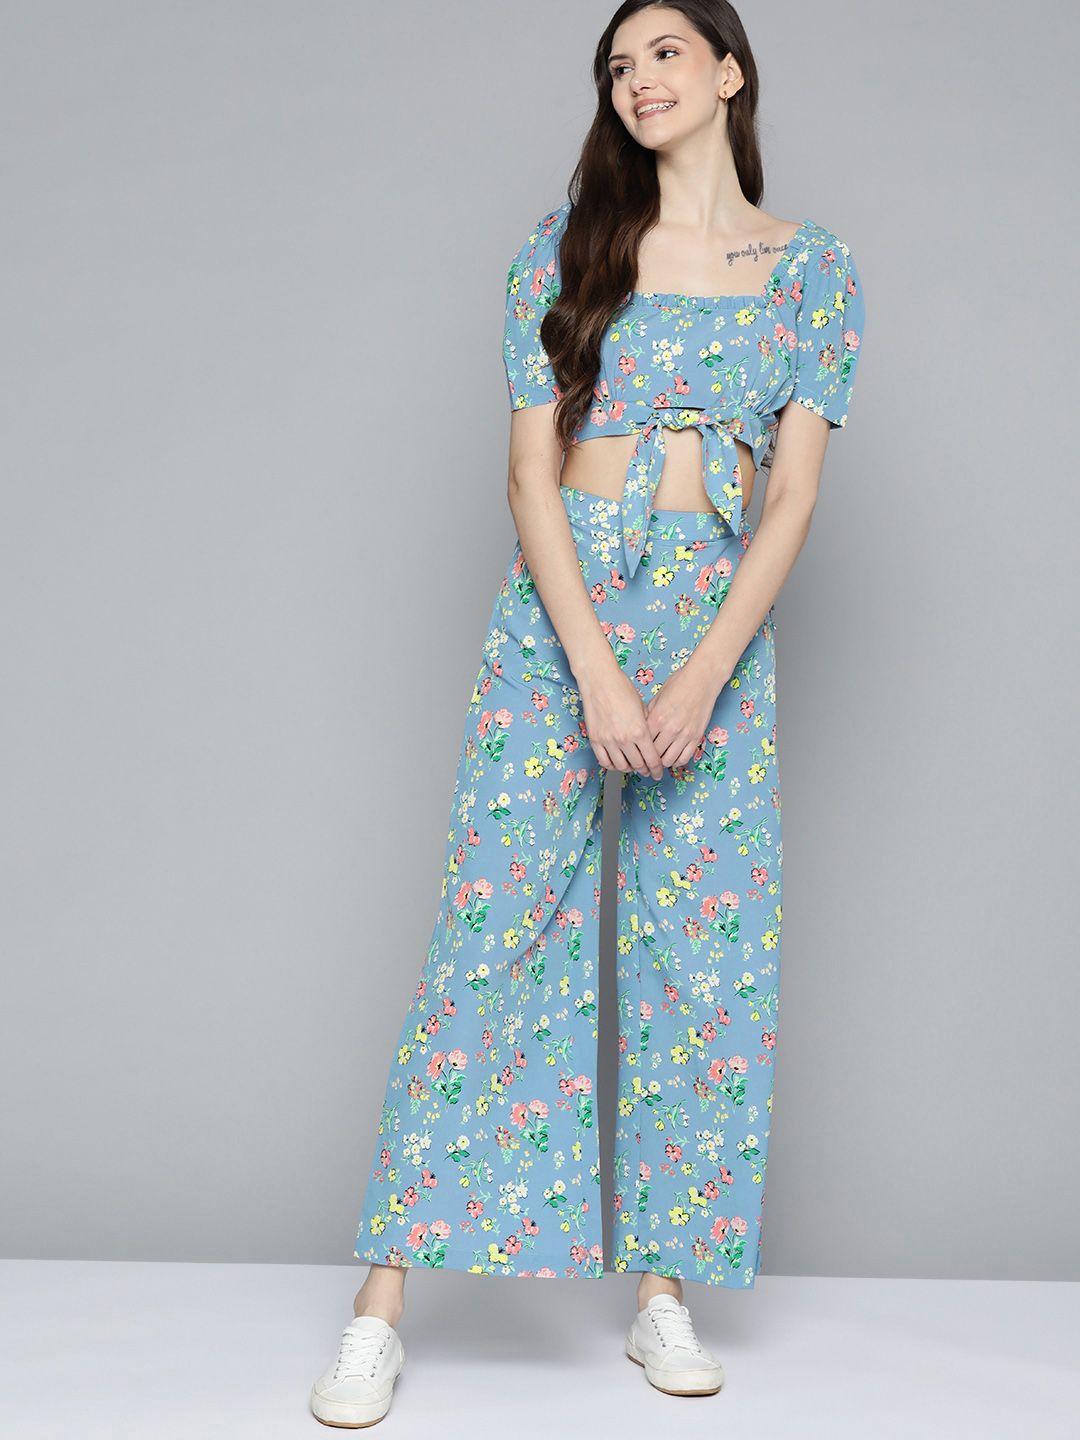 mast & harbour women blue & white floral printed co-ord set